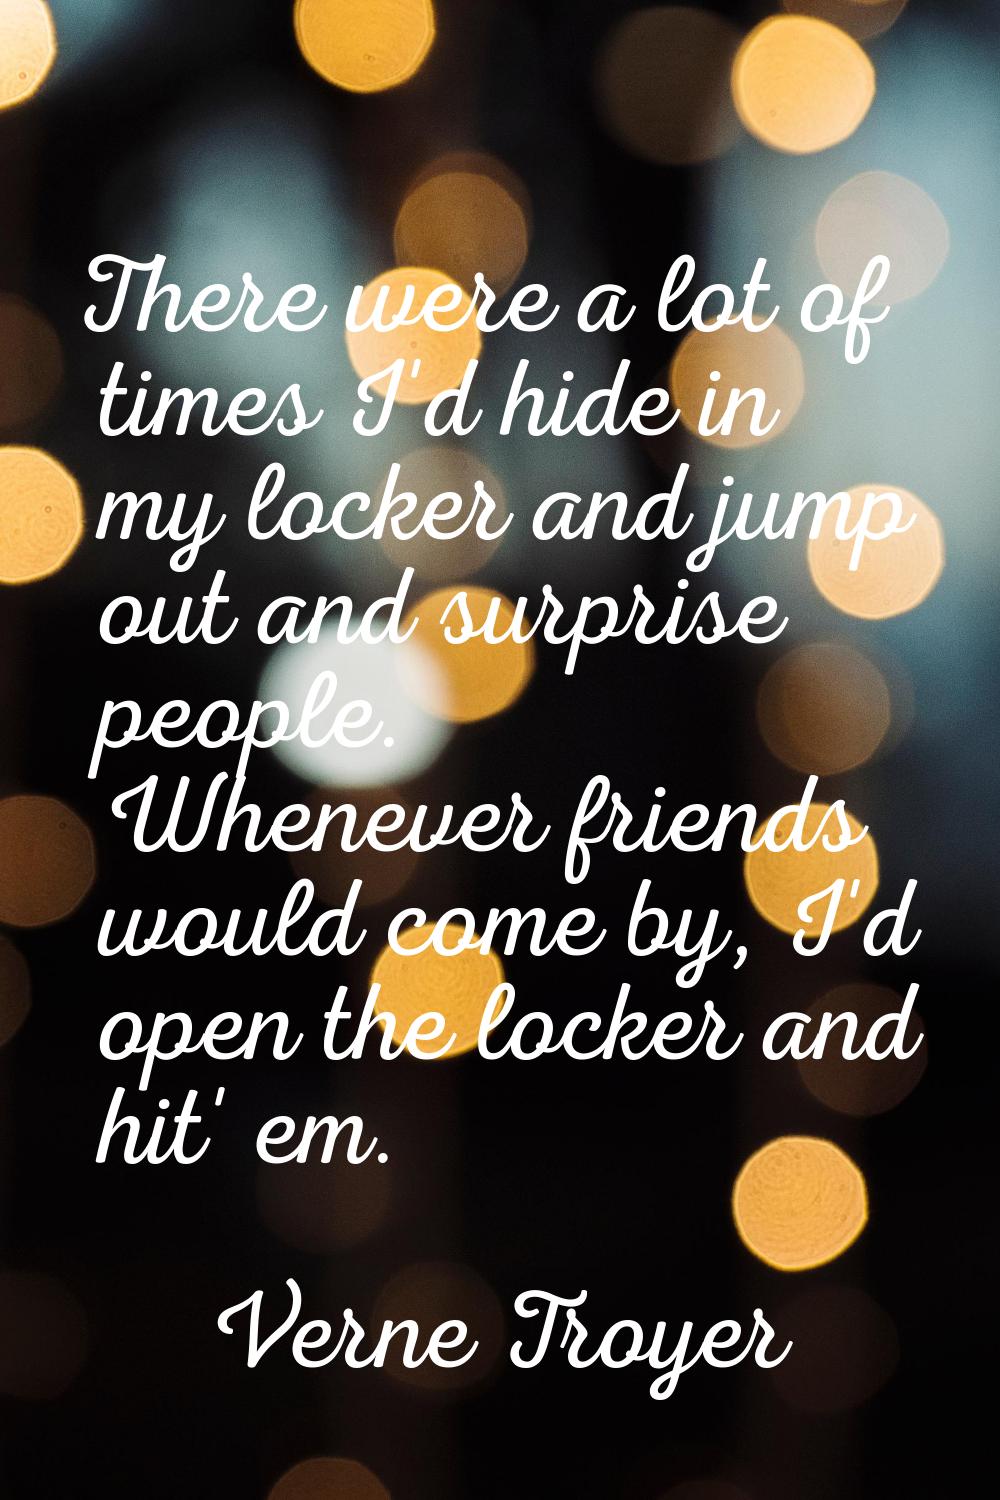 There were a lot of times I'd hide in my locker and jump out and surprise people. Whenever friends 